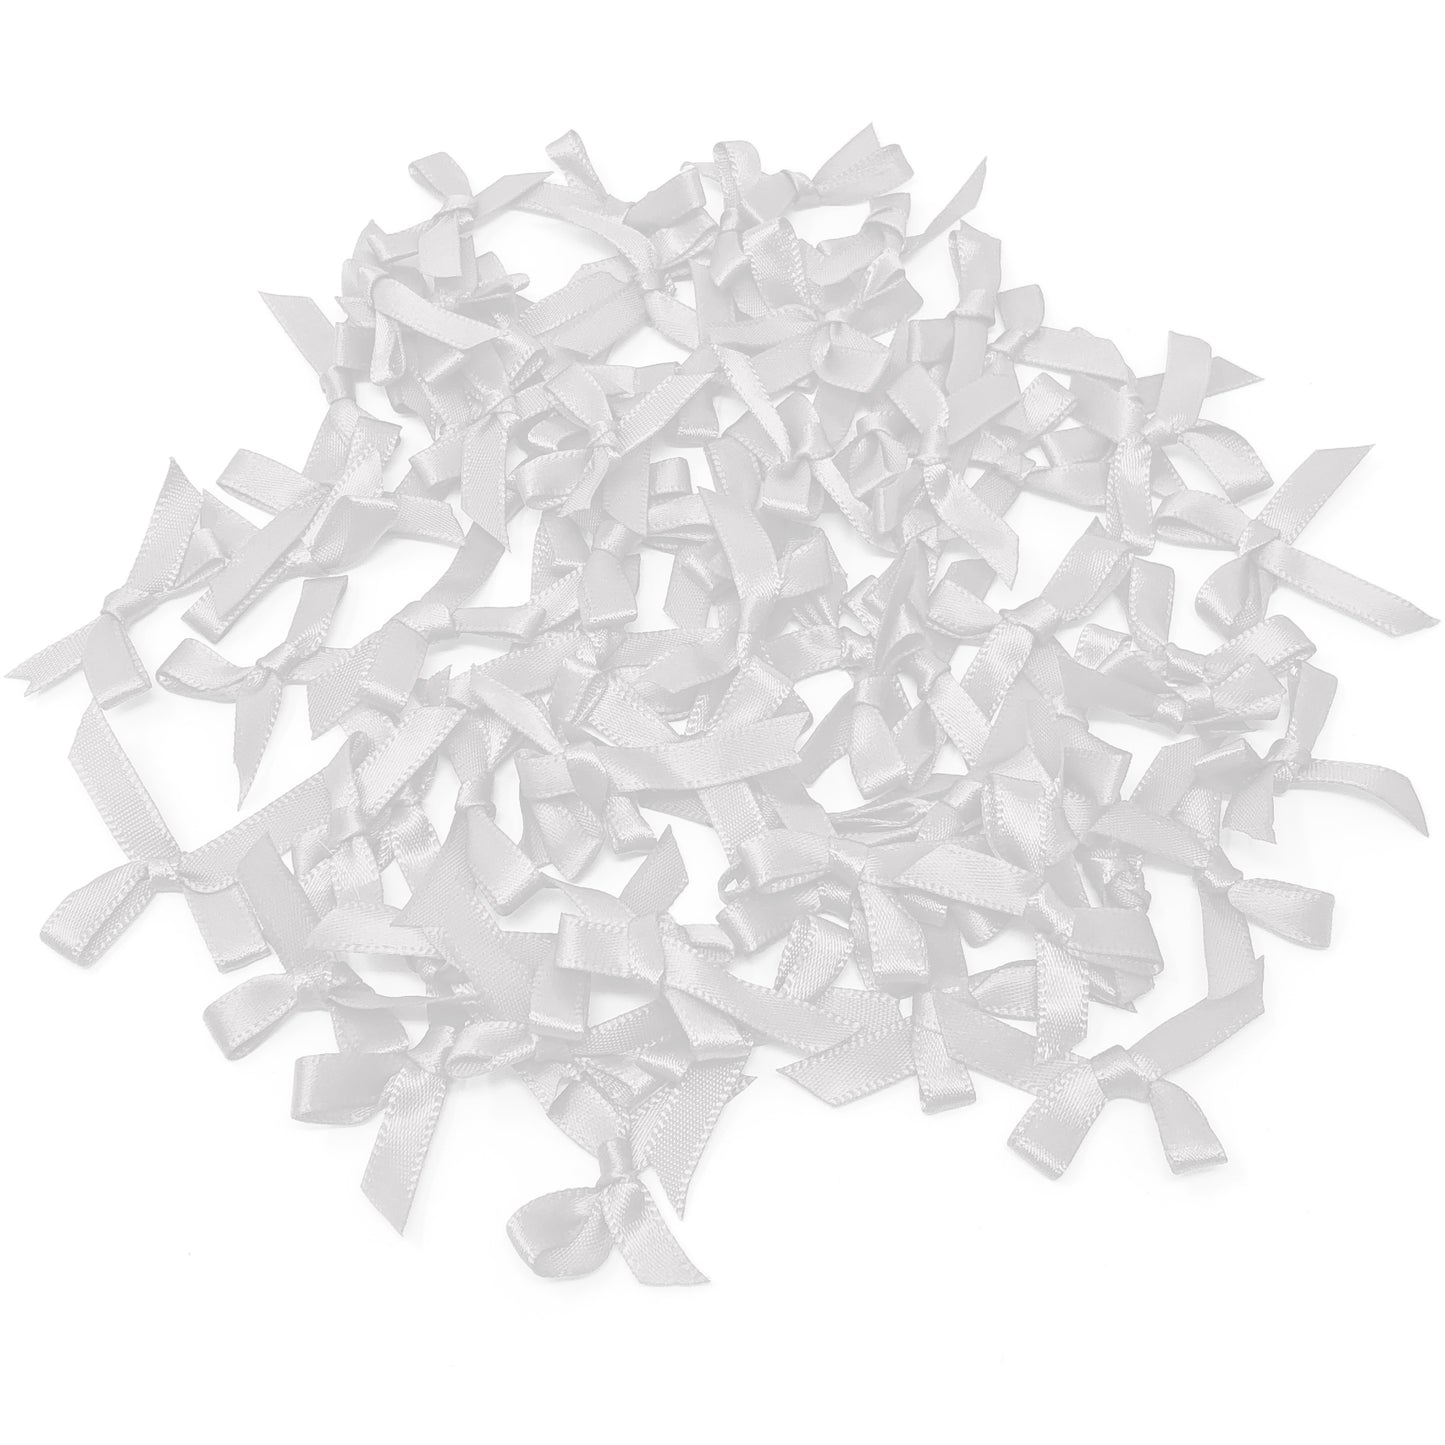 White 7mm 40x25mm Christmas Ribbon Bows - Pack of 75